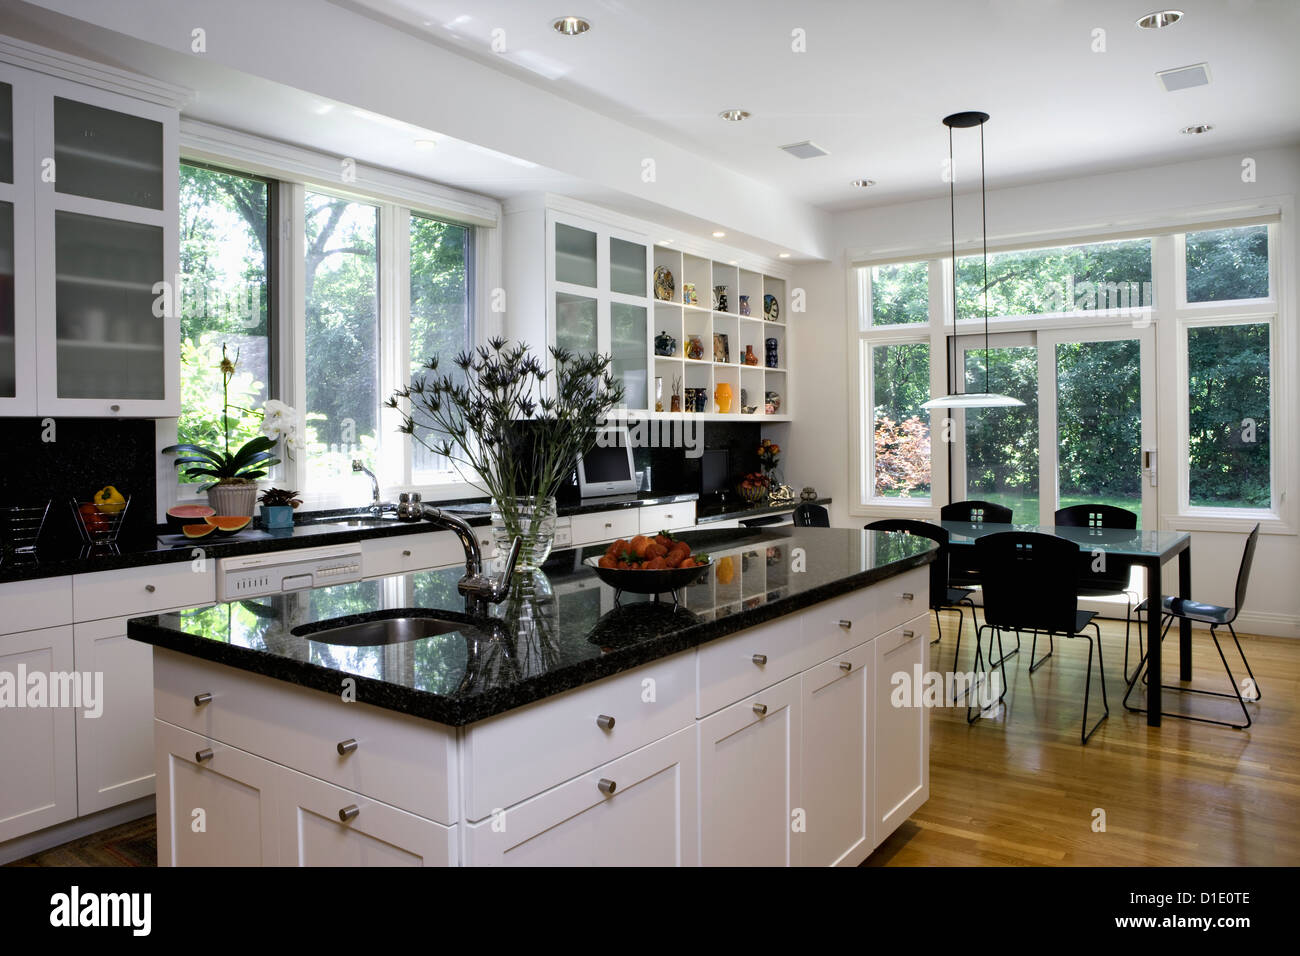 KITCHENS island in foreground dark granite eating area beyond with pendant style light fixture collection display above desk Stock Photo